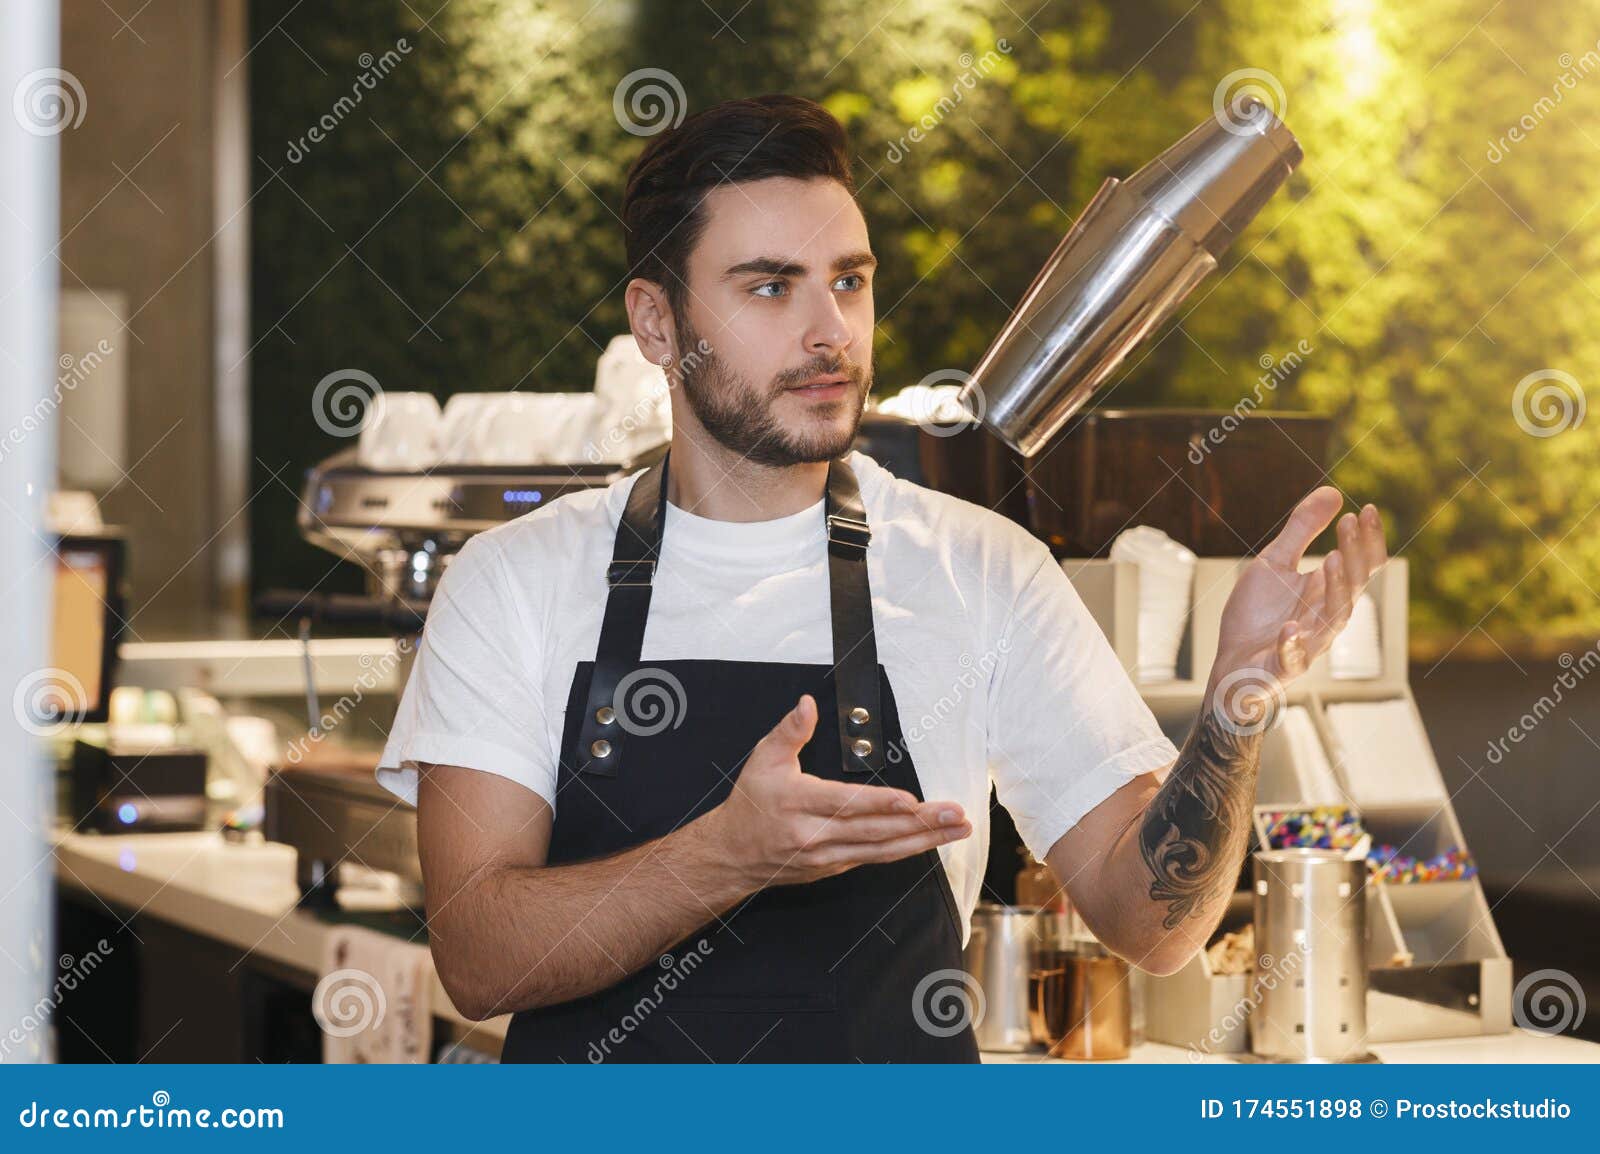 https://thumbs.dreamstime.com/z/bartender-using-shaker-making-cocktail-standing-bar-counter-indoor-professional-barista-coffee-cafeteria-174551898.jpg